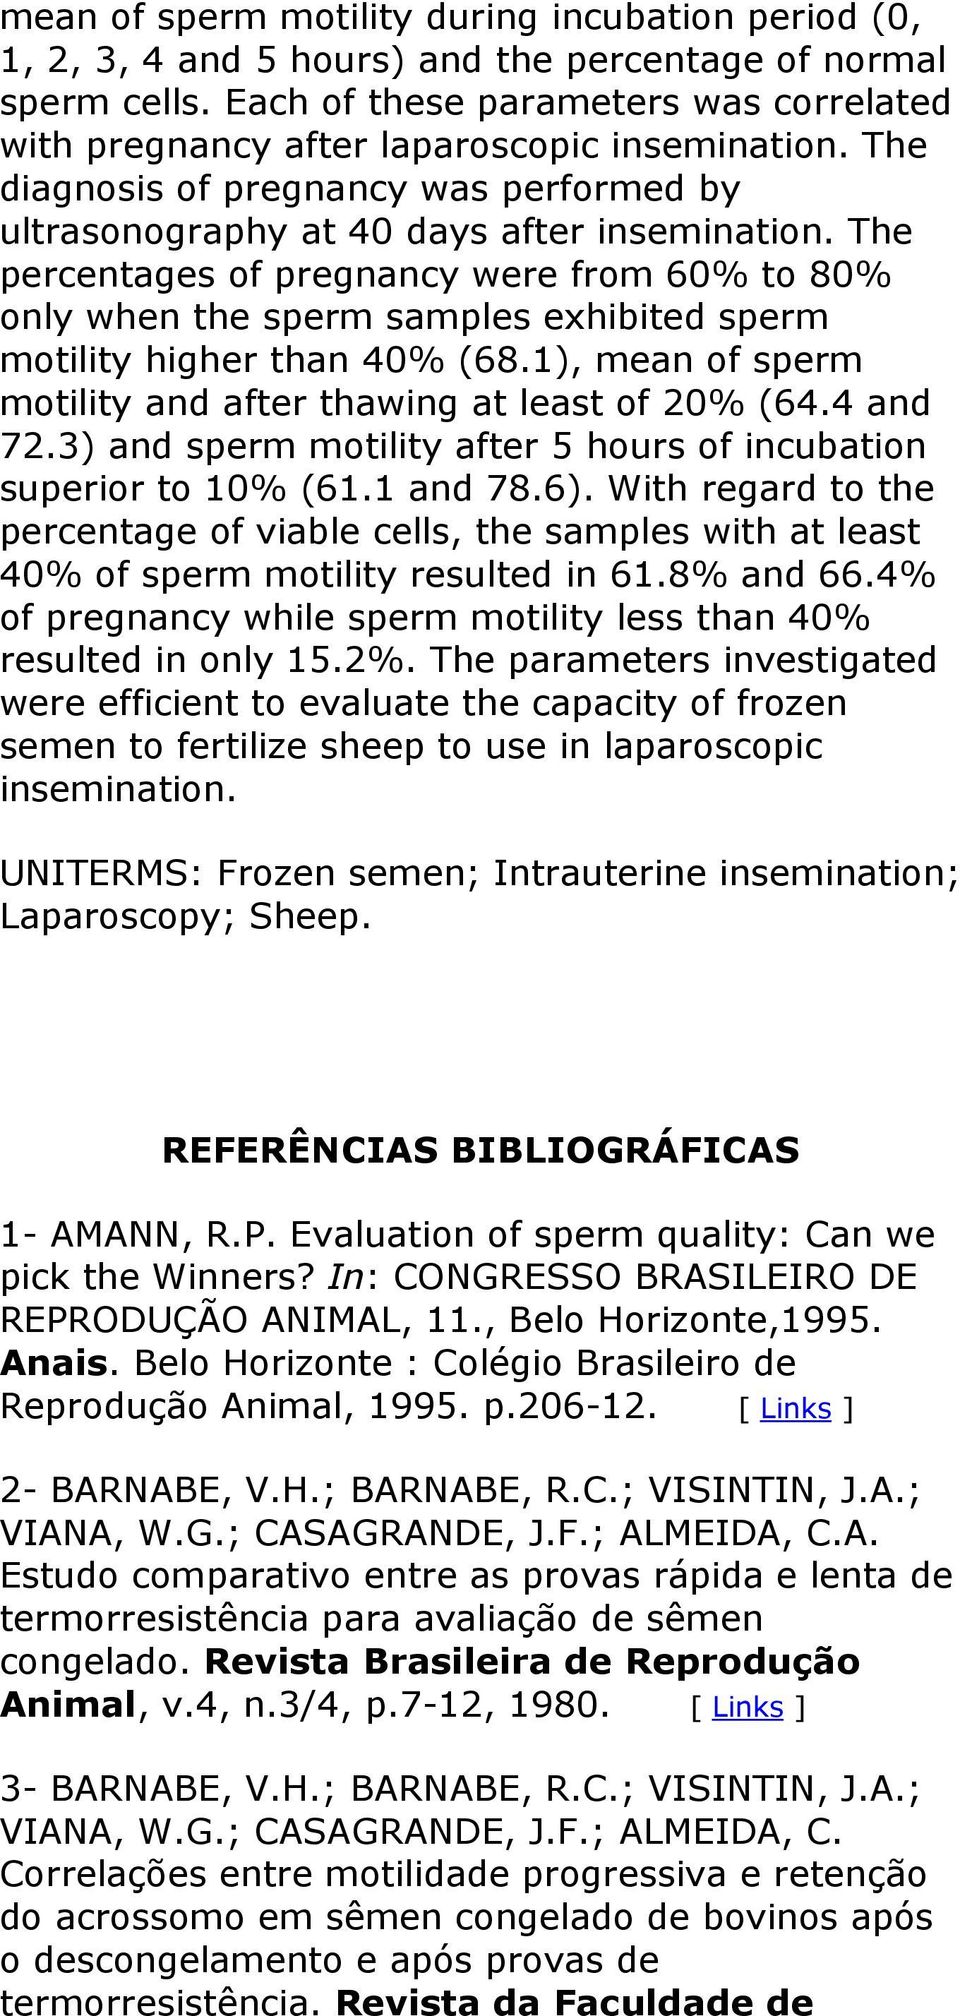 The percentages of pregnancy were from 60% to 80% only when the sperm samples exhibited sperm motility higher than 40% (68.1), mean of sperm motility and after thawing at least of 20% (64.4 and 72.